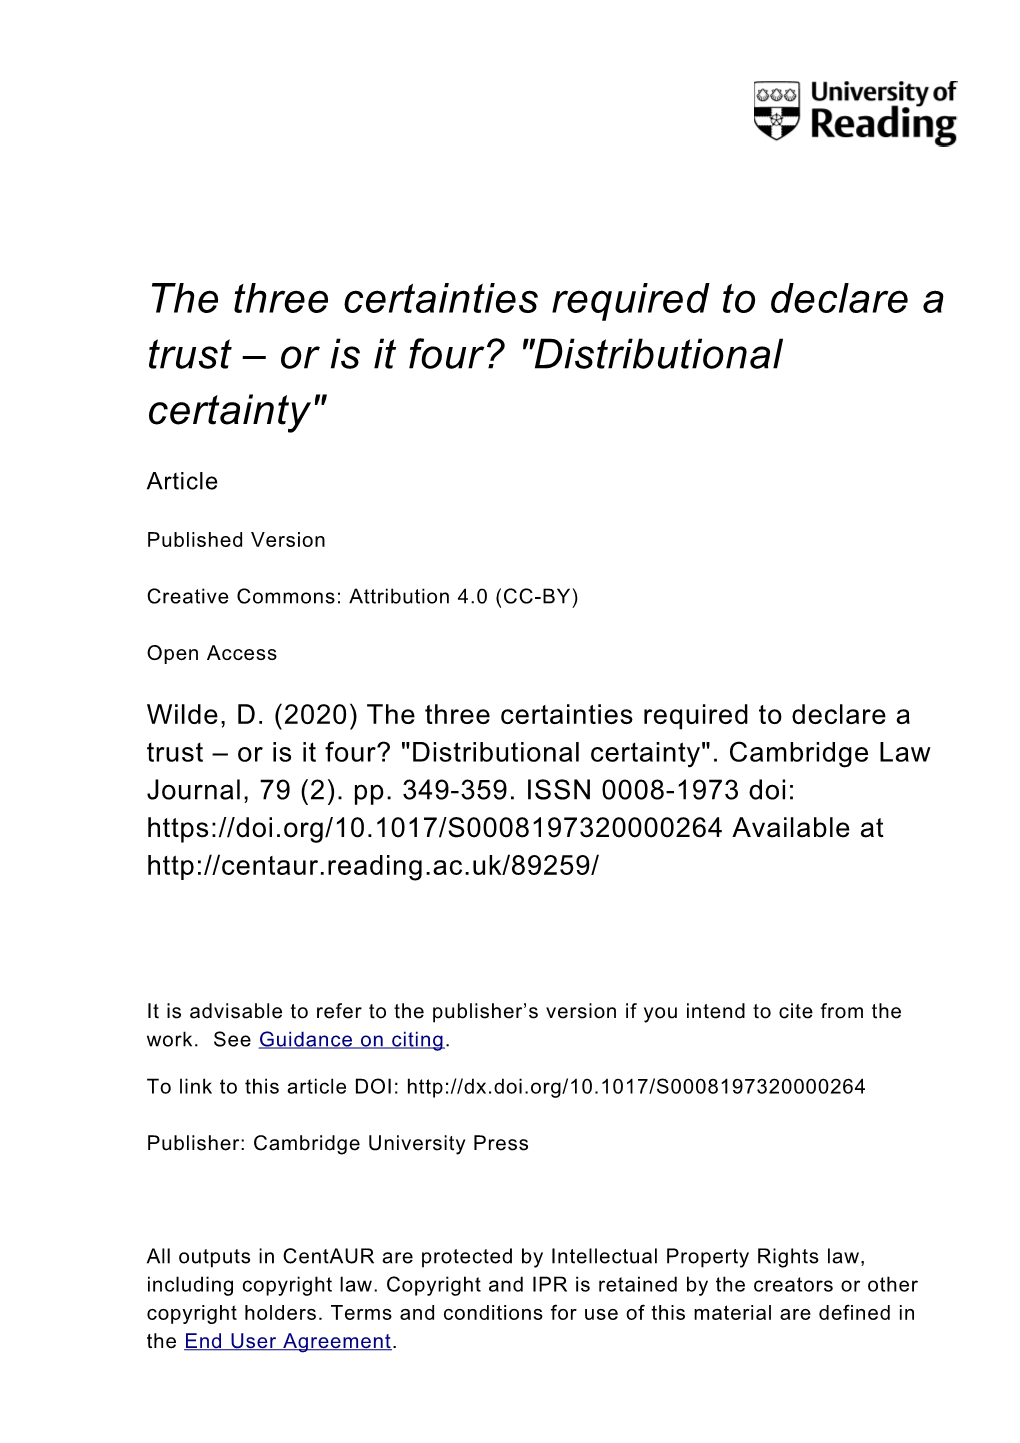 The Three Certainties Required to Declare a Trust – Or Is It Four? "Distributional Certainty"